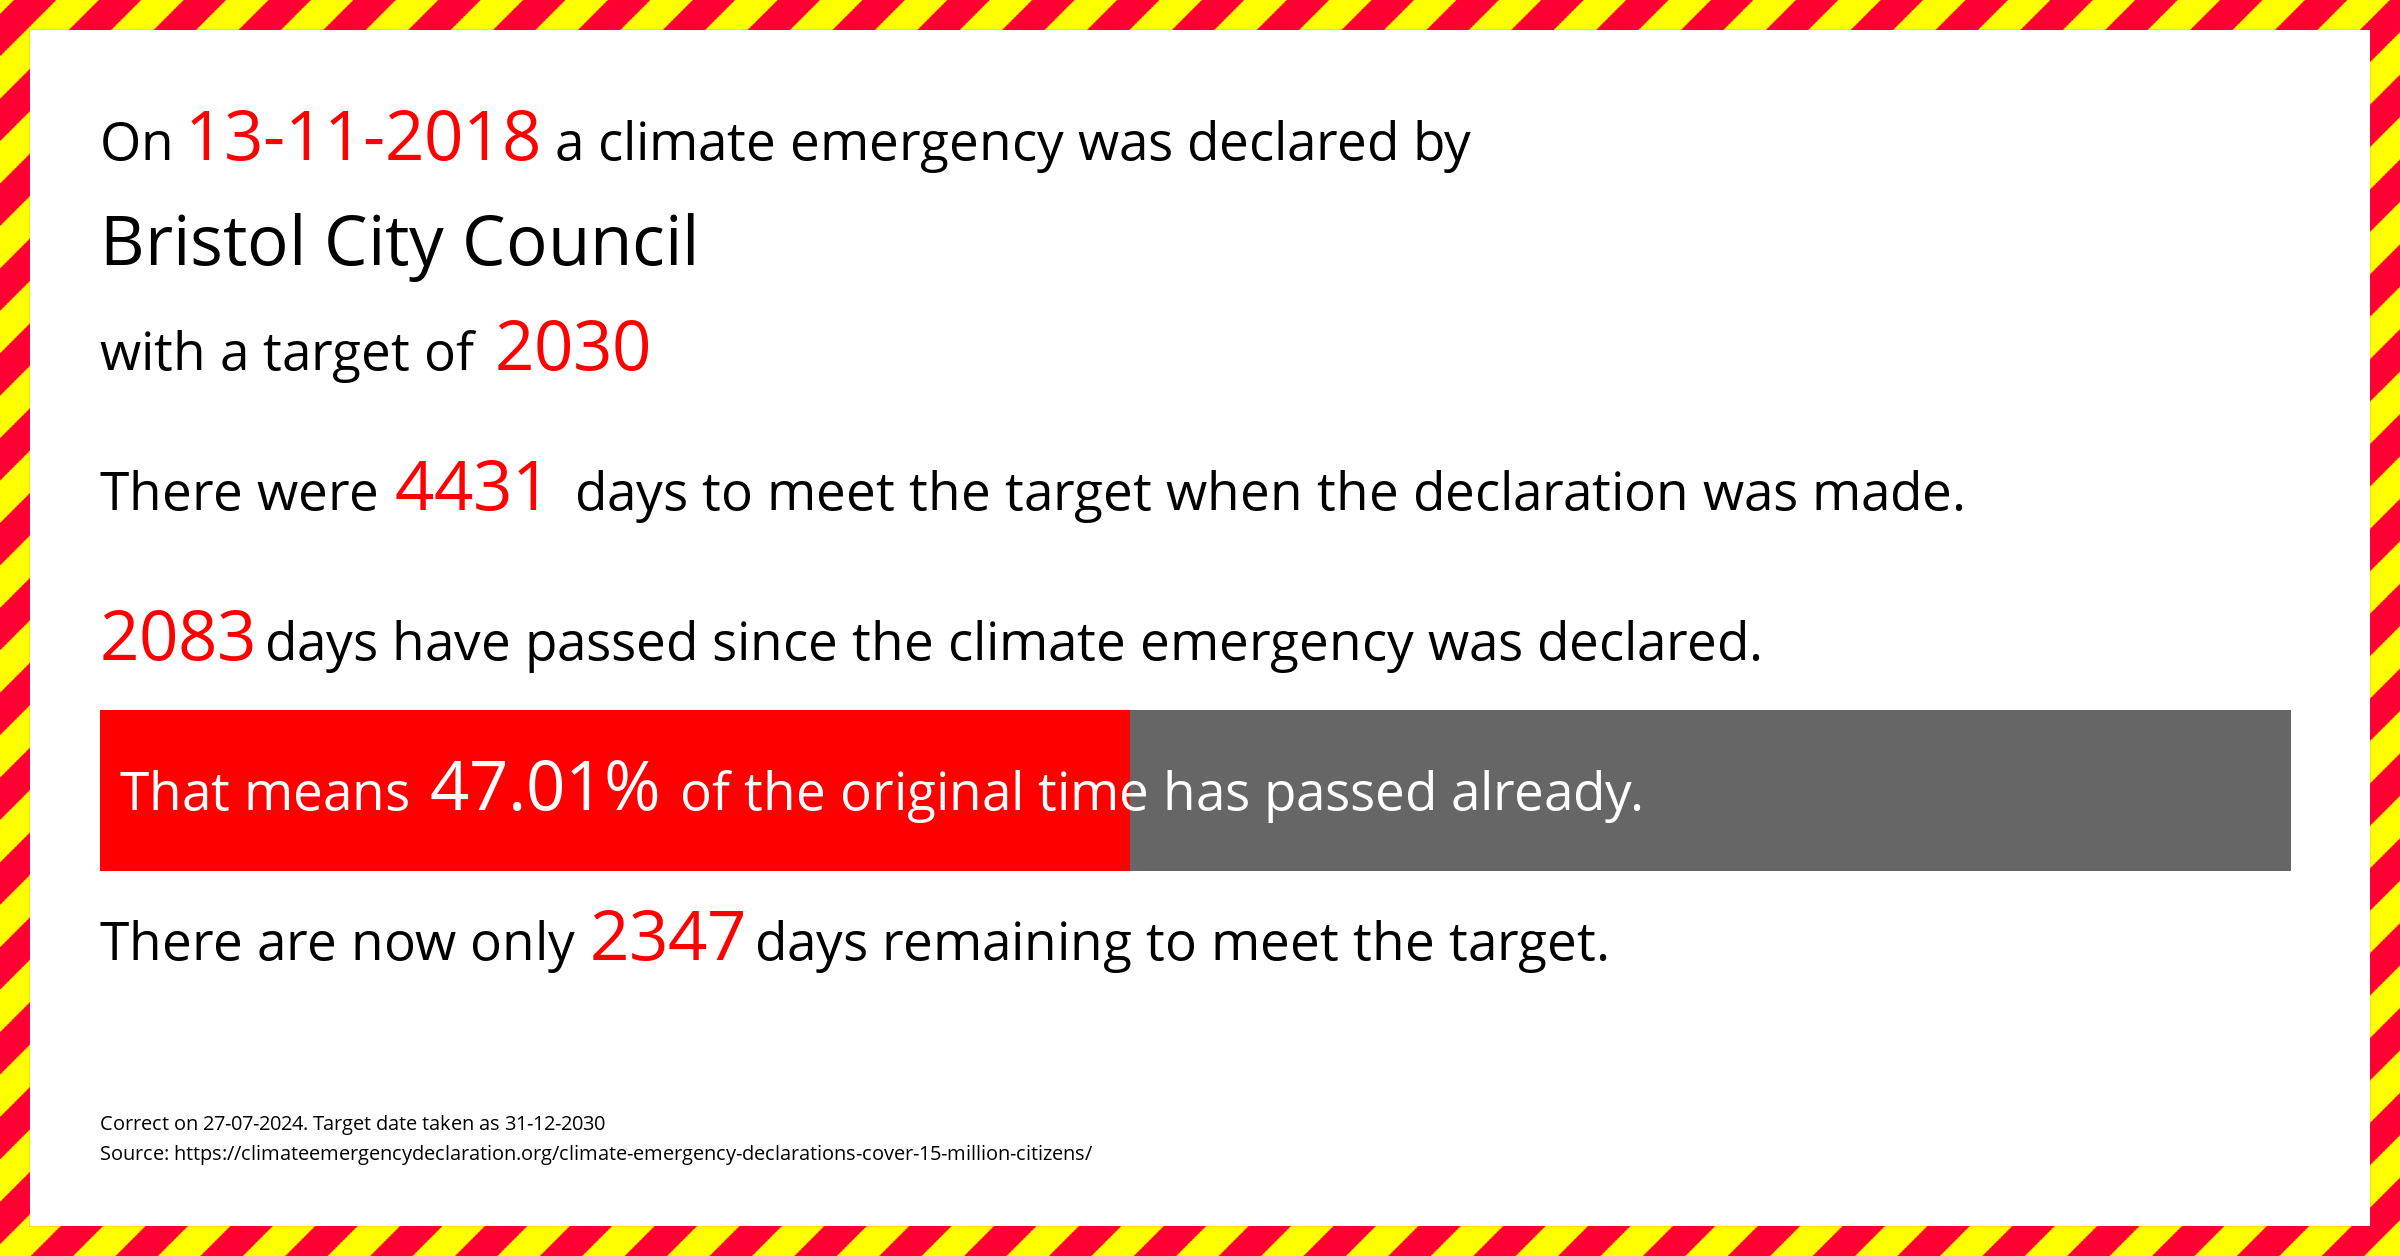 Bristol City Council declared a Climate emergency on Tuesday 13th November 2018, with a target of 2030.